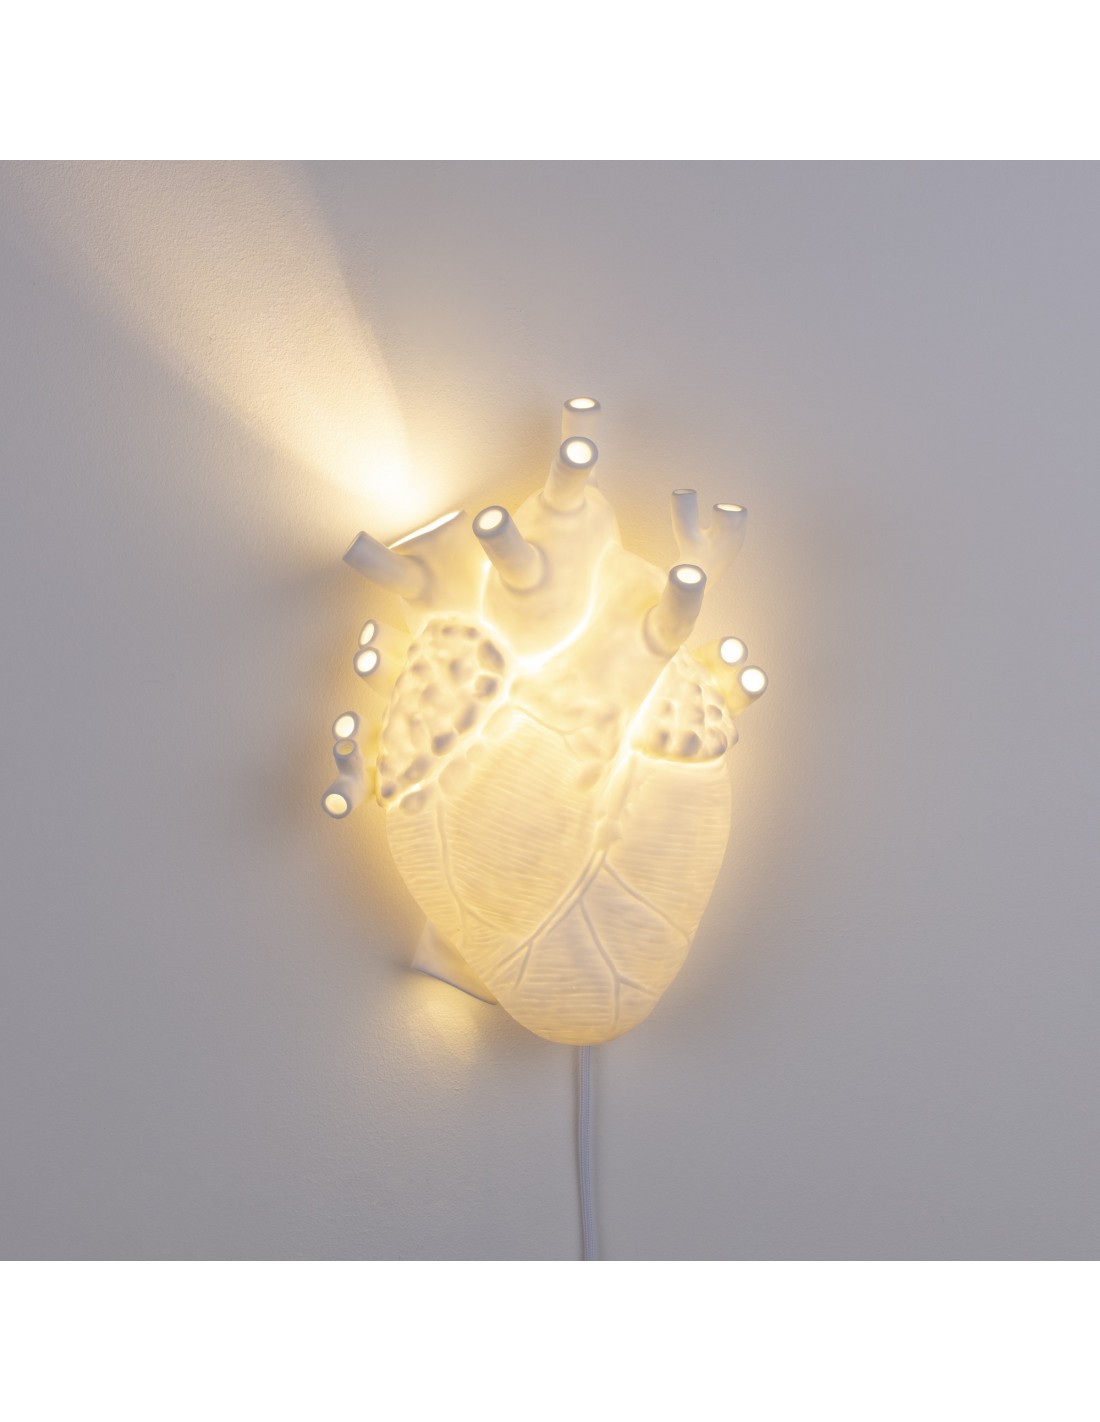 Bourgondië ademen sociaal Buy SELETTI Heart Lamp - Wall lamp online? Fast and safe delivery!